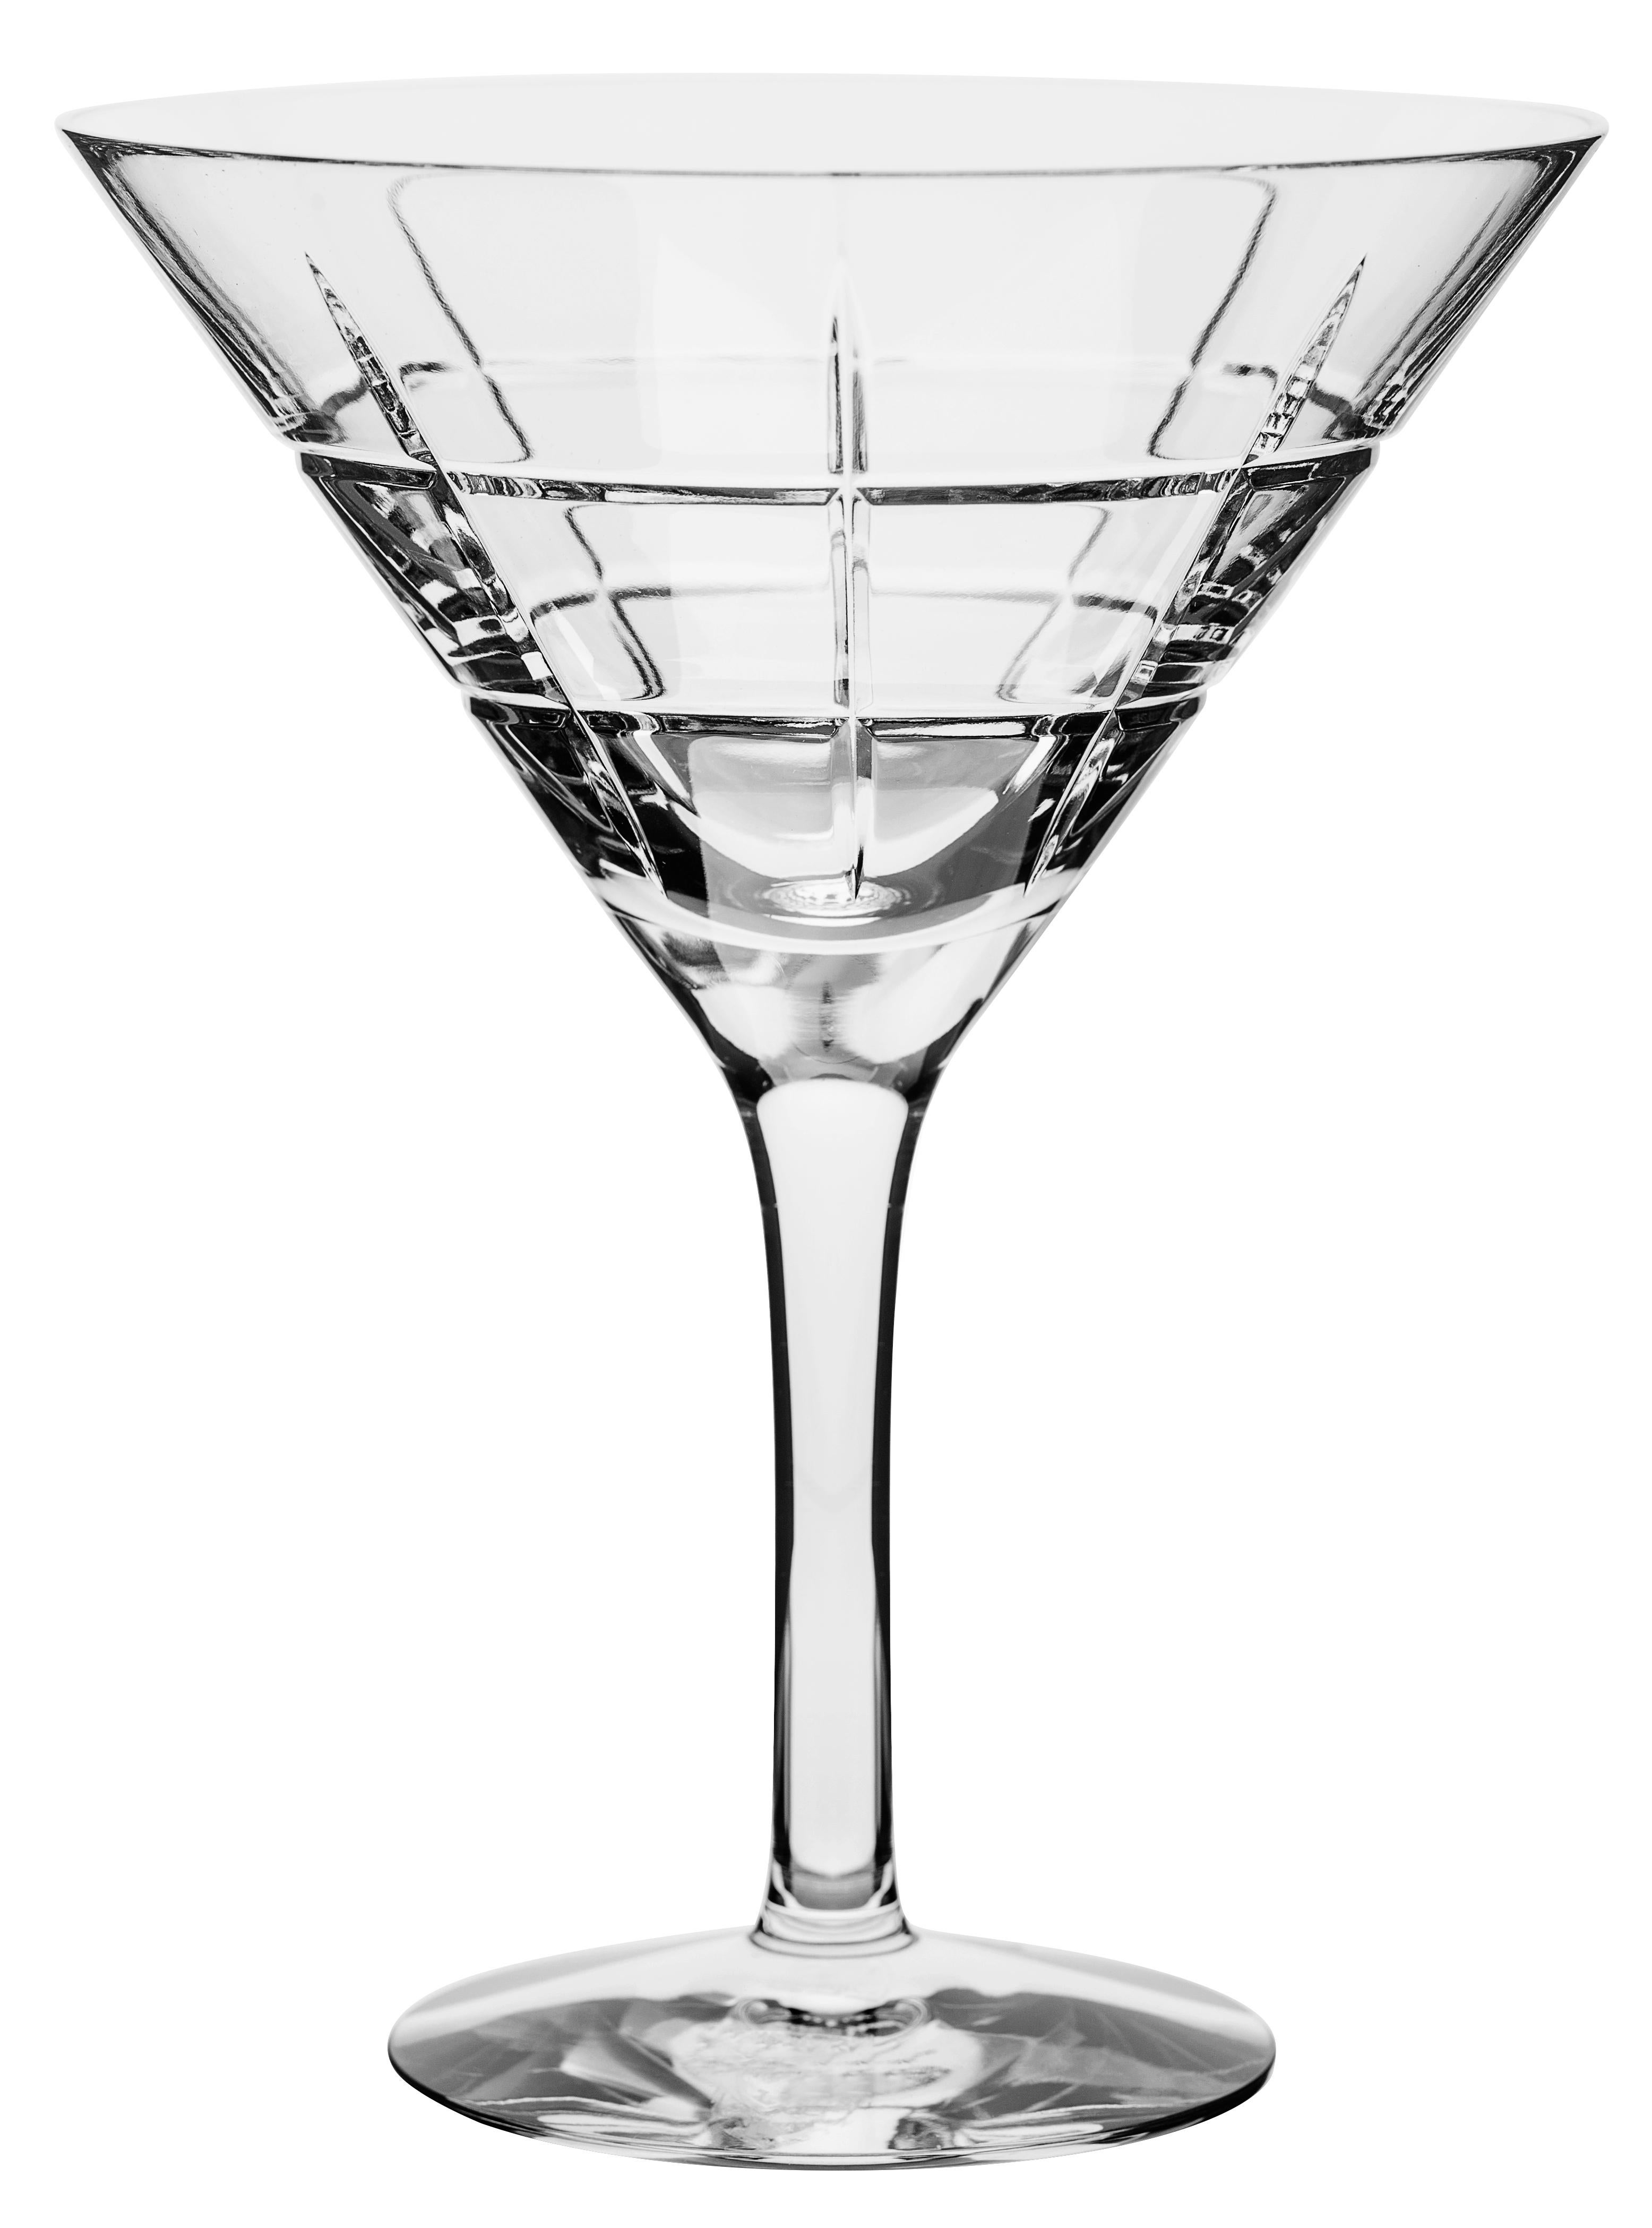 Street Martini from Orrefors, which holds 7 oz, is ideal for serving cocktails, especially martinis or cosmopolitans. The martini glass has a checked motif of straight lines inspired by the criss-cross streets and avenues of Manhattan, New York.